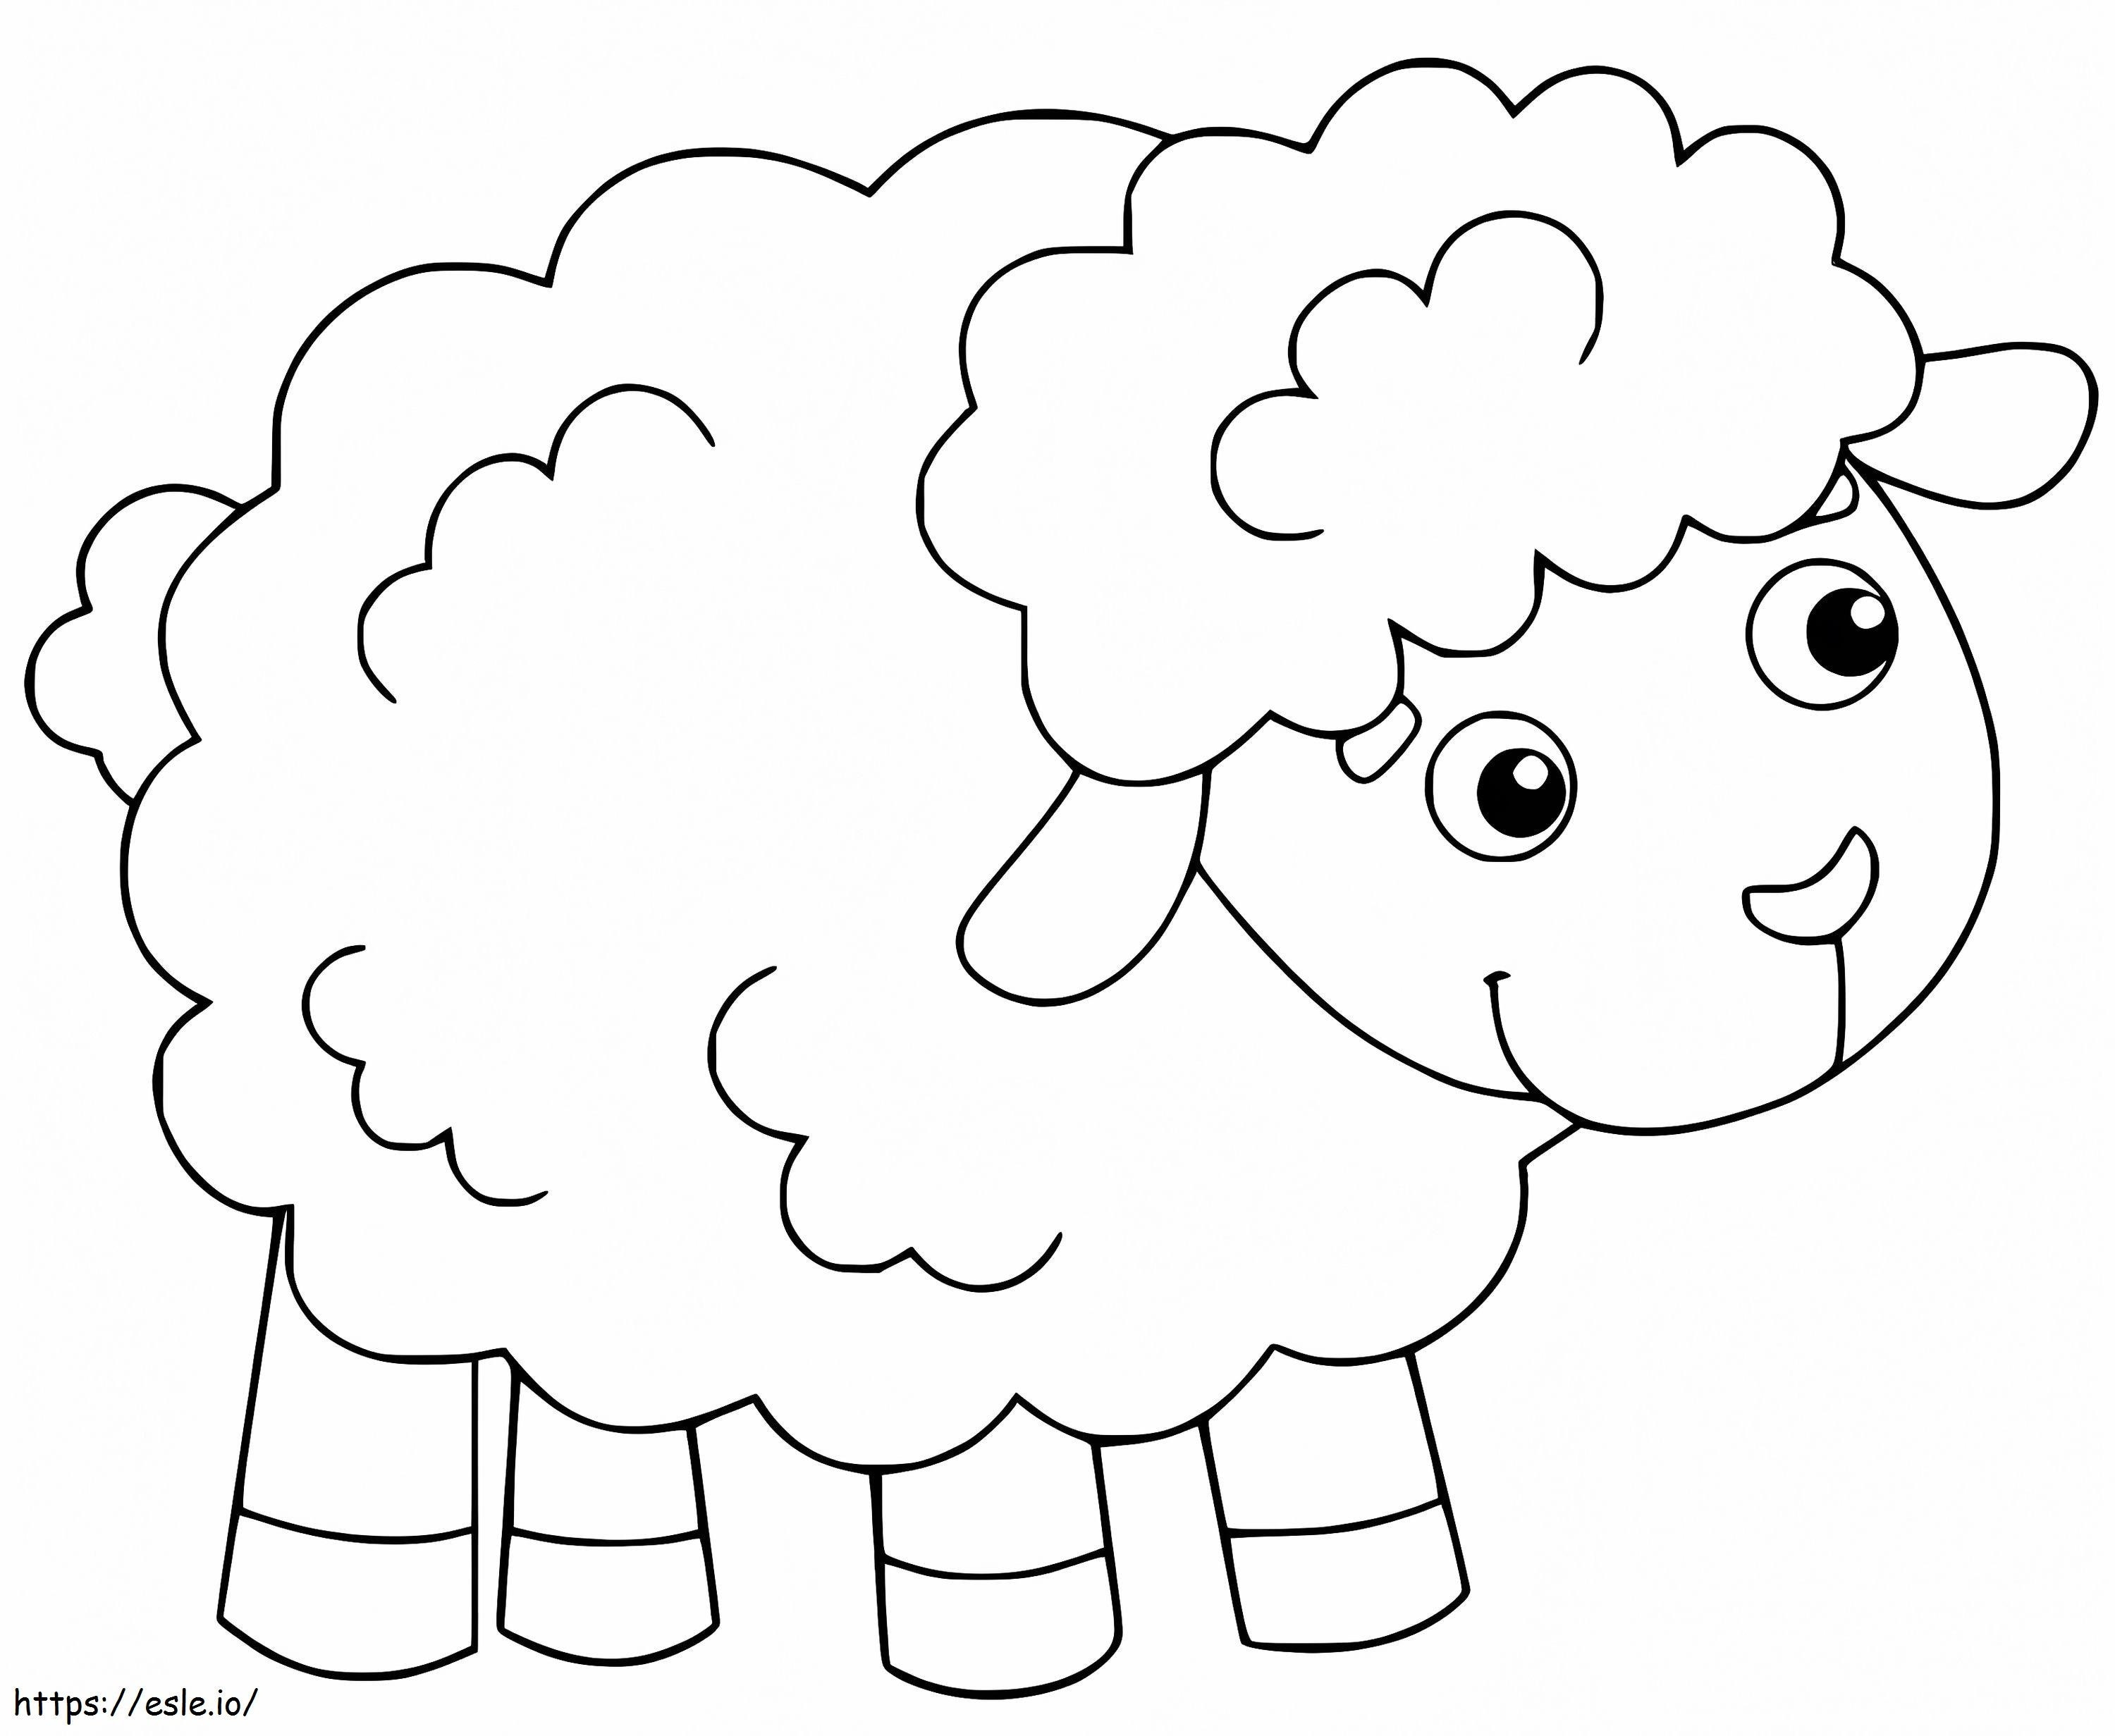 Cute Furry Sheep coloring page